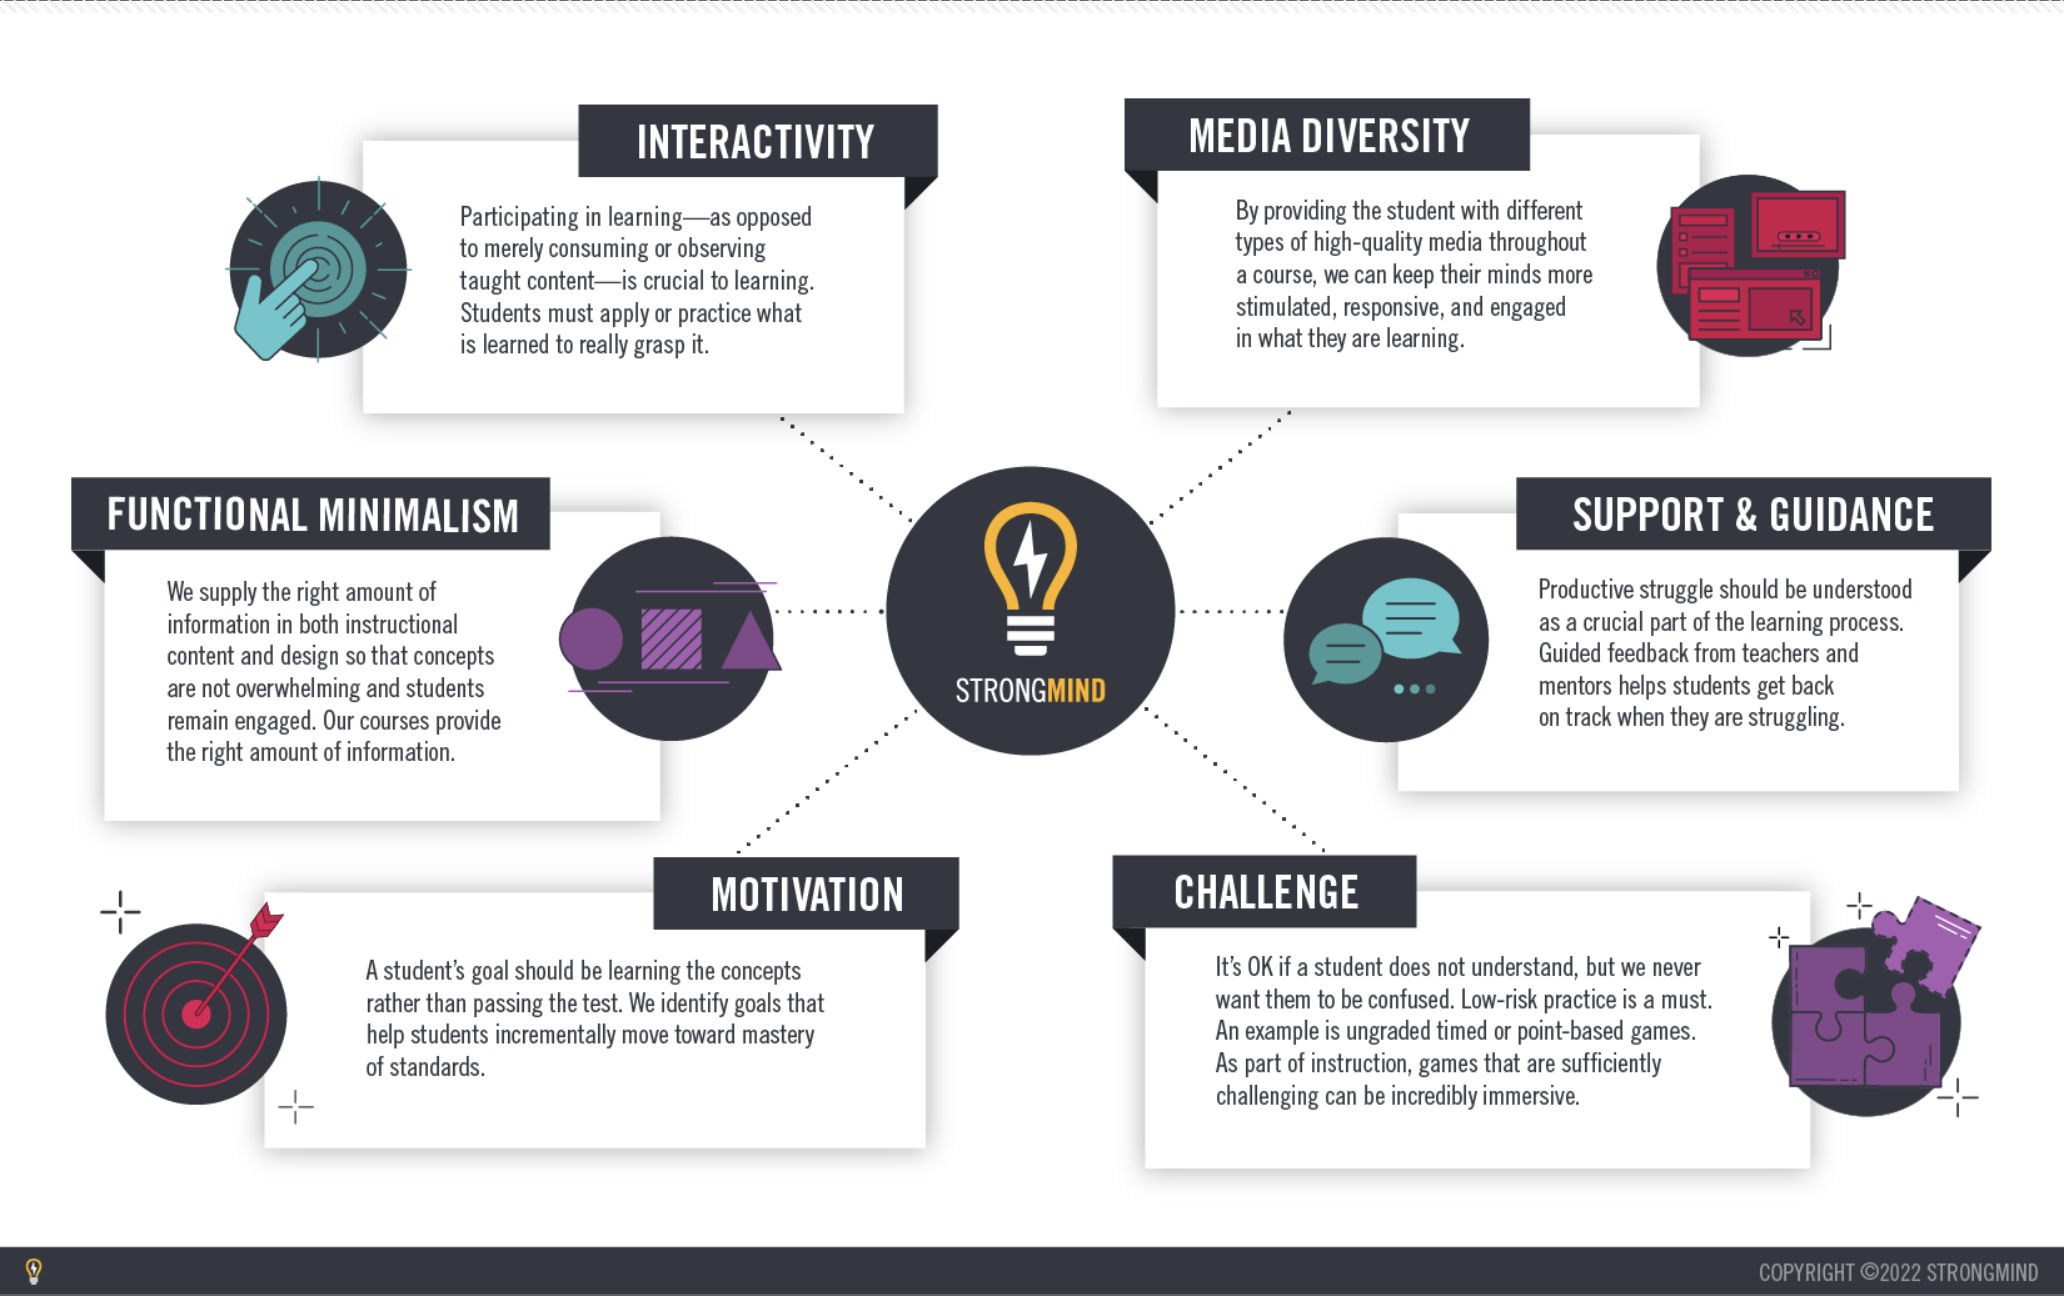 Infographic showing key principles of StrongMind immersion: Interactivity, media diversity, support & guidance, challenge, motivation, functional minimalism